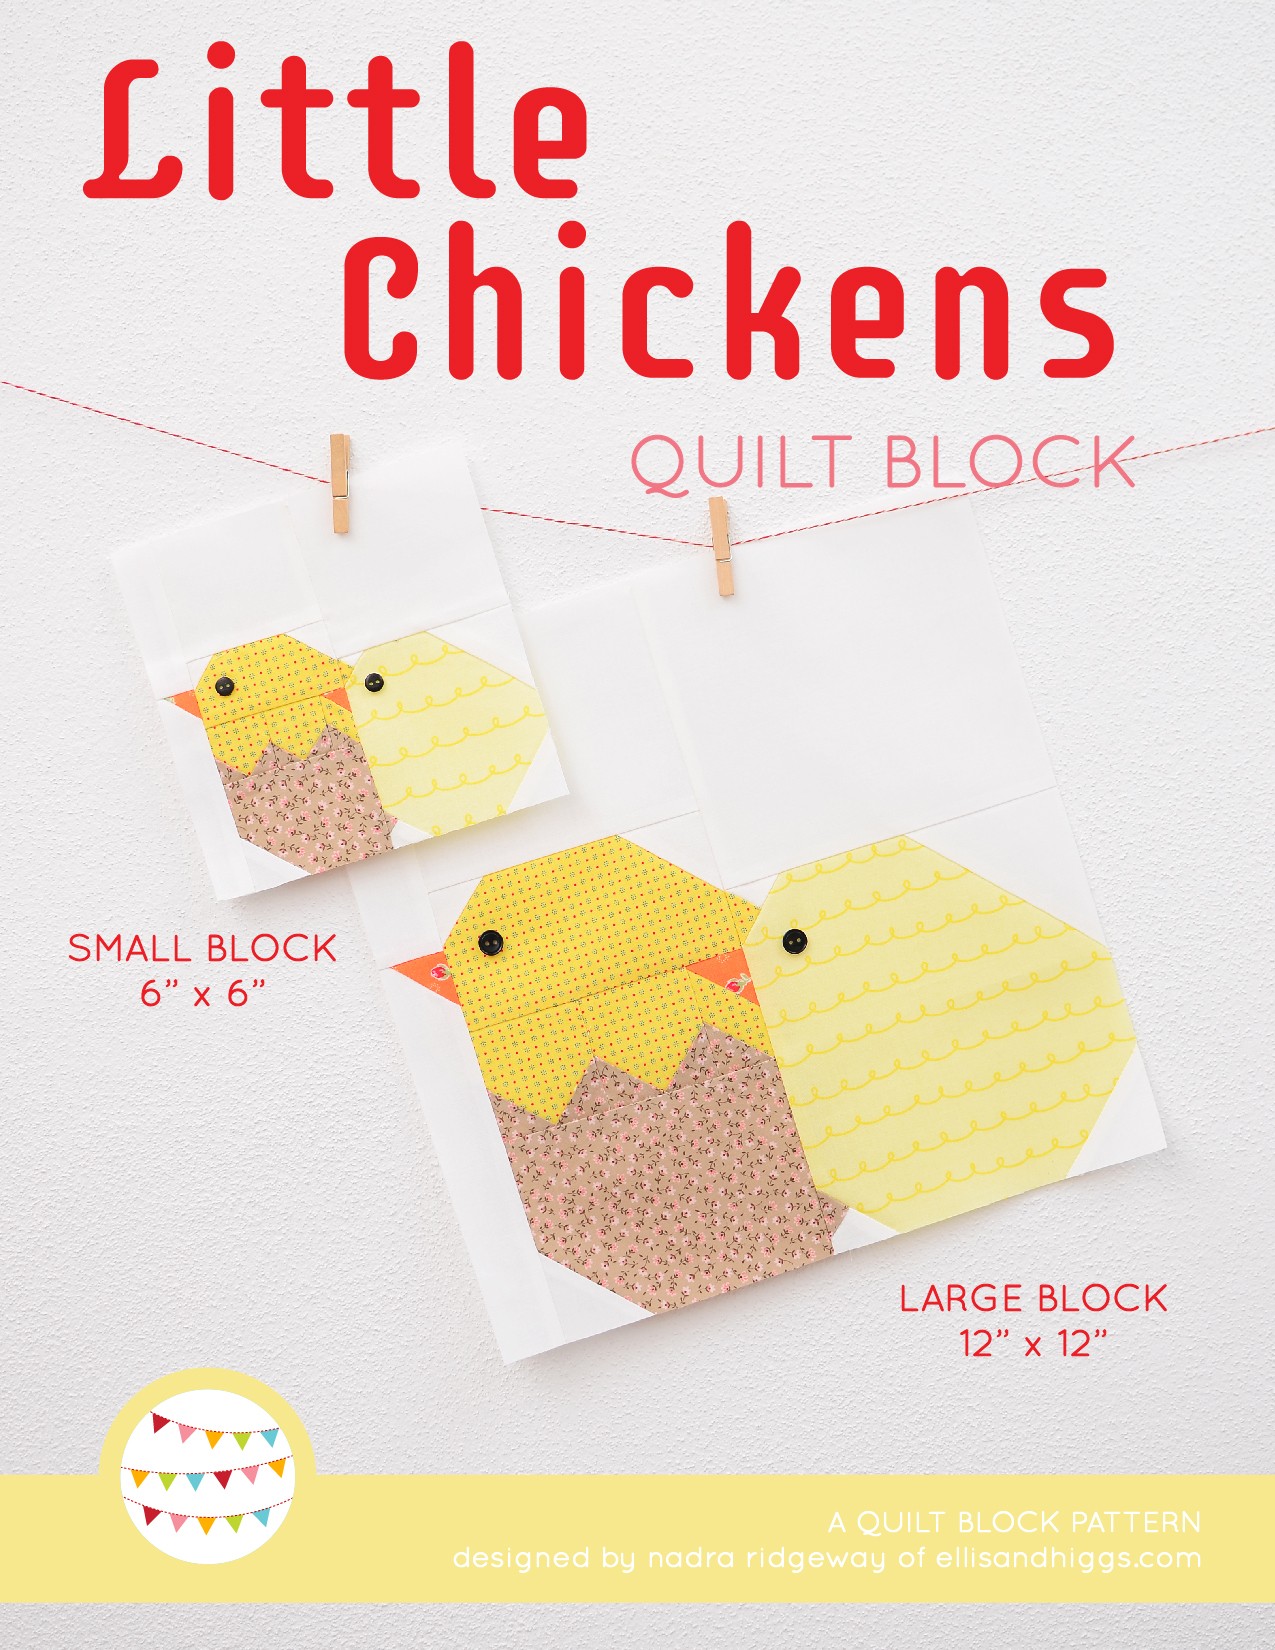 Little Chickens quilt block in two sizes hanging on a wall